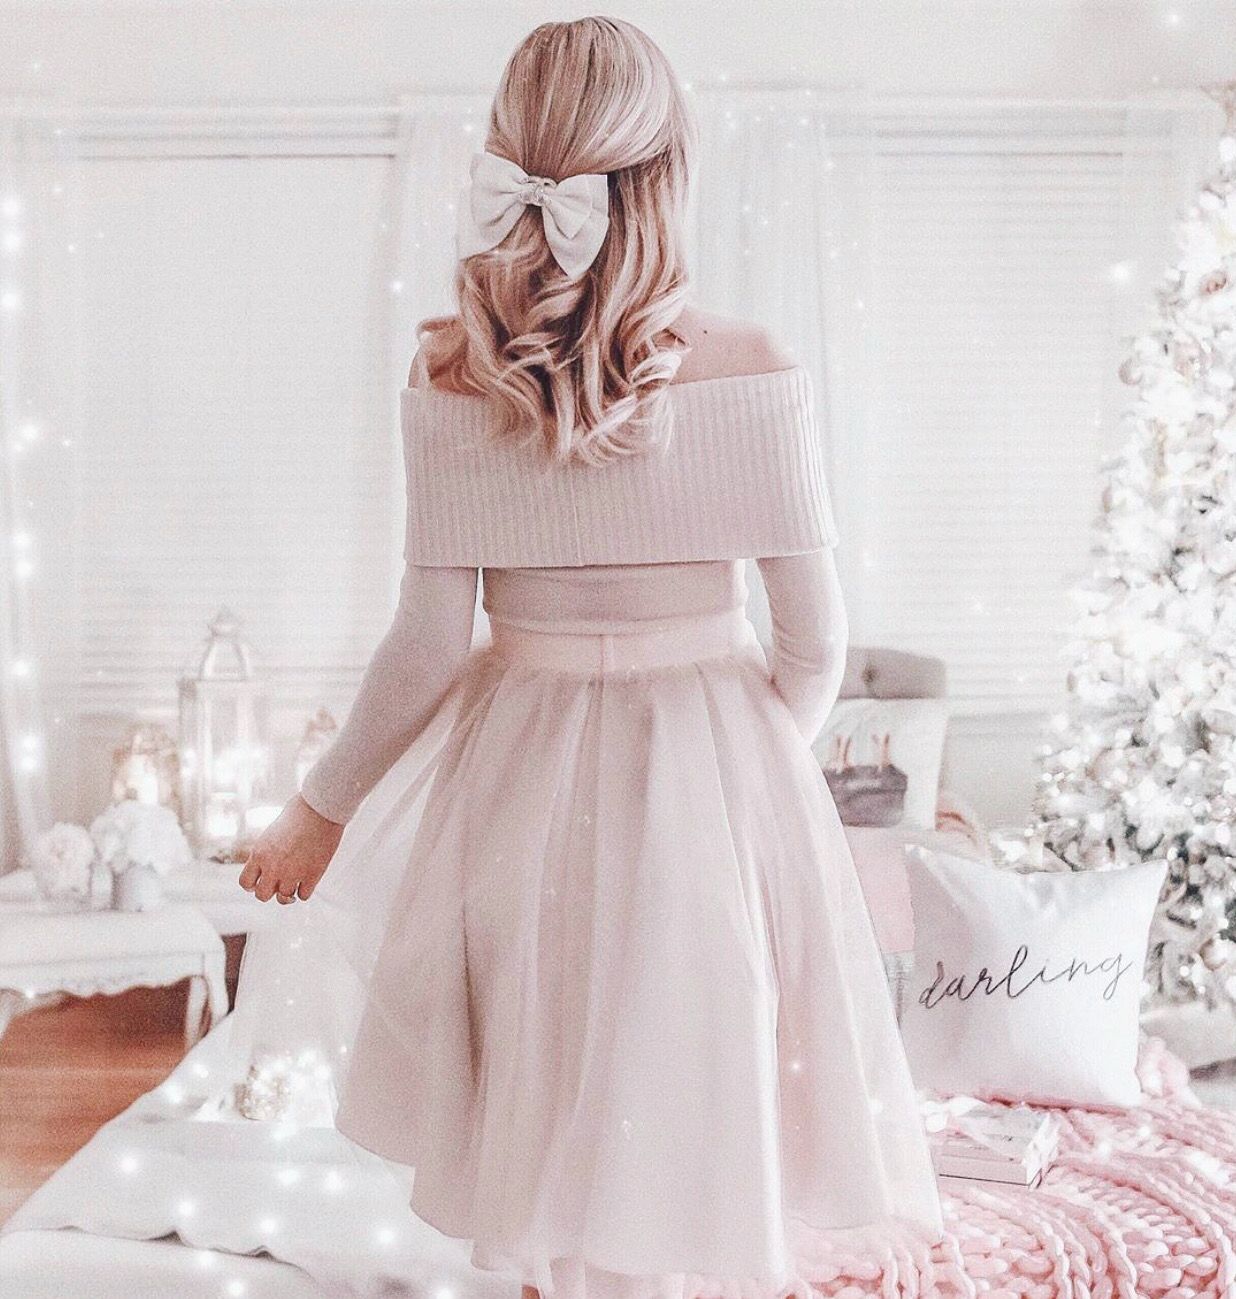 Bliss Tulle | A tulle skirt is ALWAYS a good idea - Bliss Tulle | A tulle skirt is ALWAYS a good idea -   9 girly style Romantic ideas